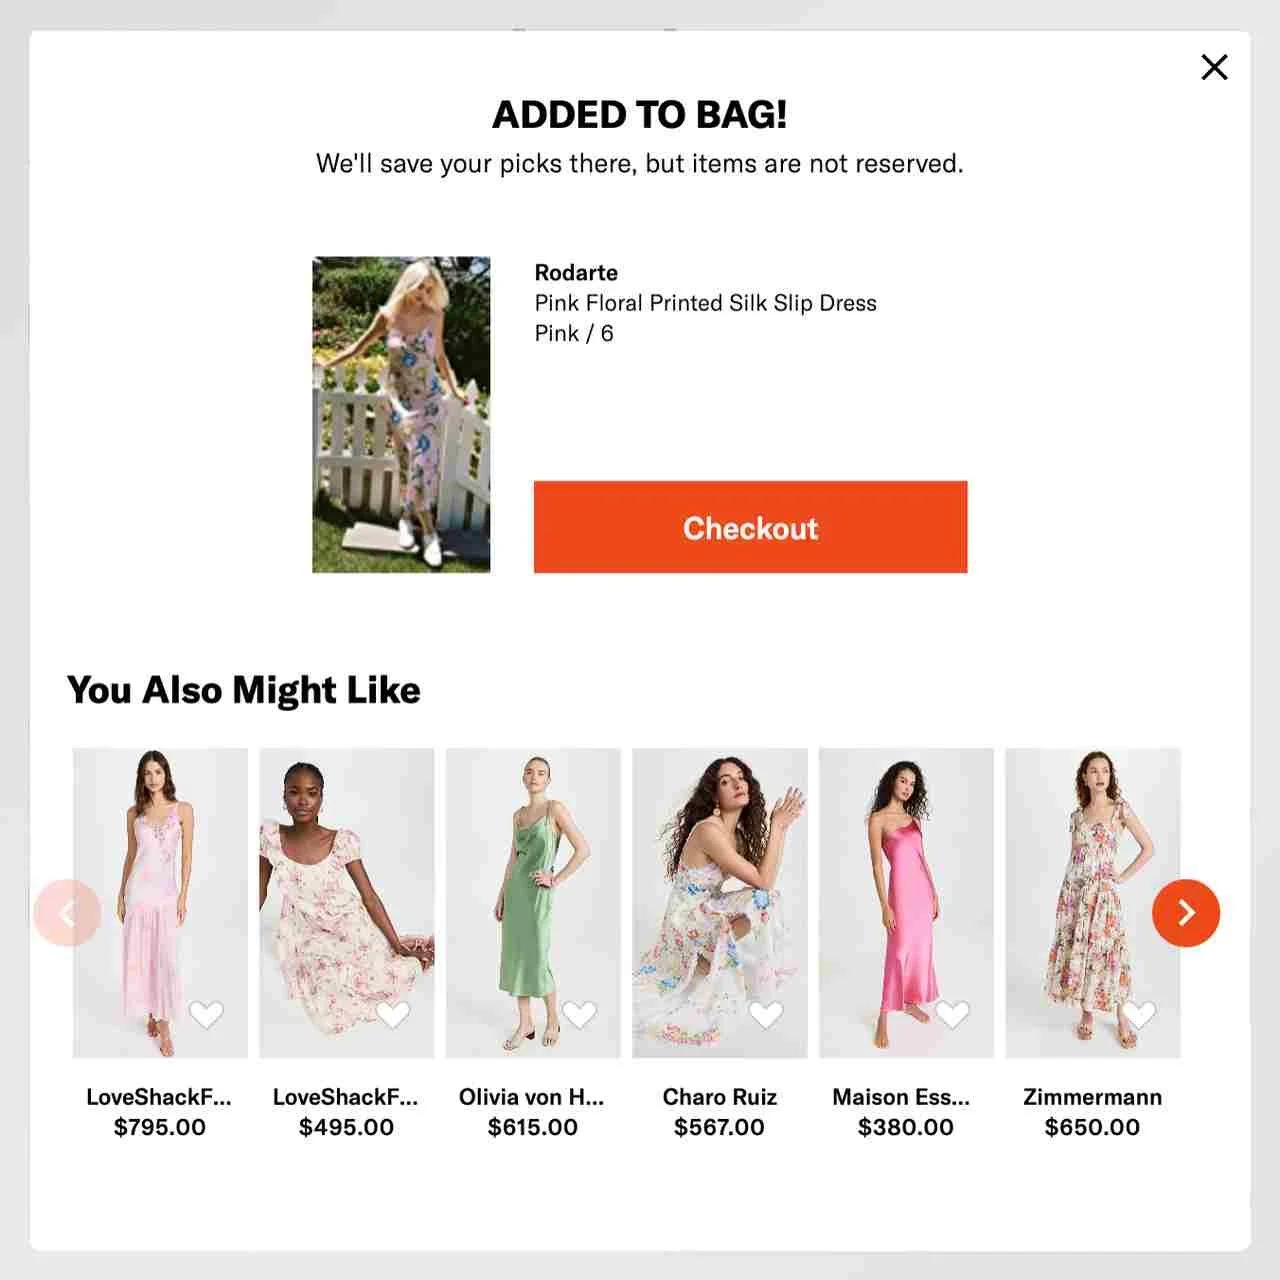 a screenshot of a cart abandonment popup example from Shopbop Upselling their similar products